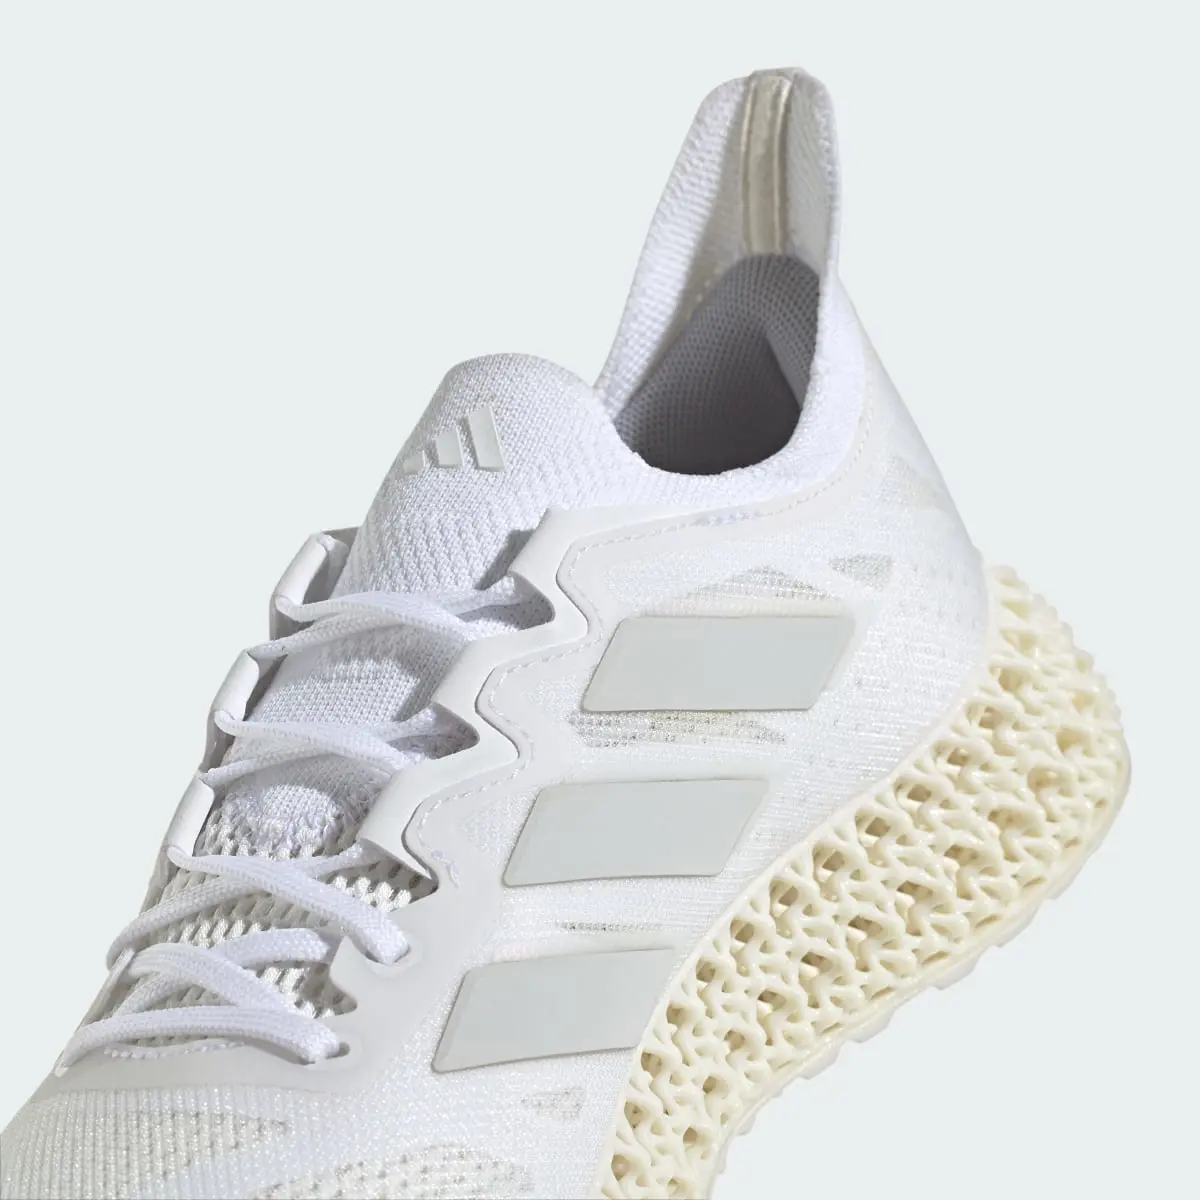 Adidas 4DFWD 3 Running Shoes. 3